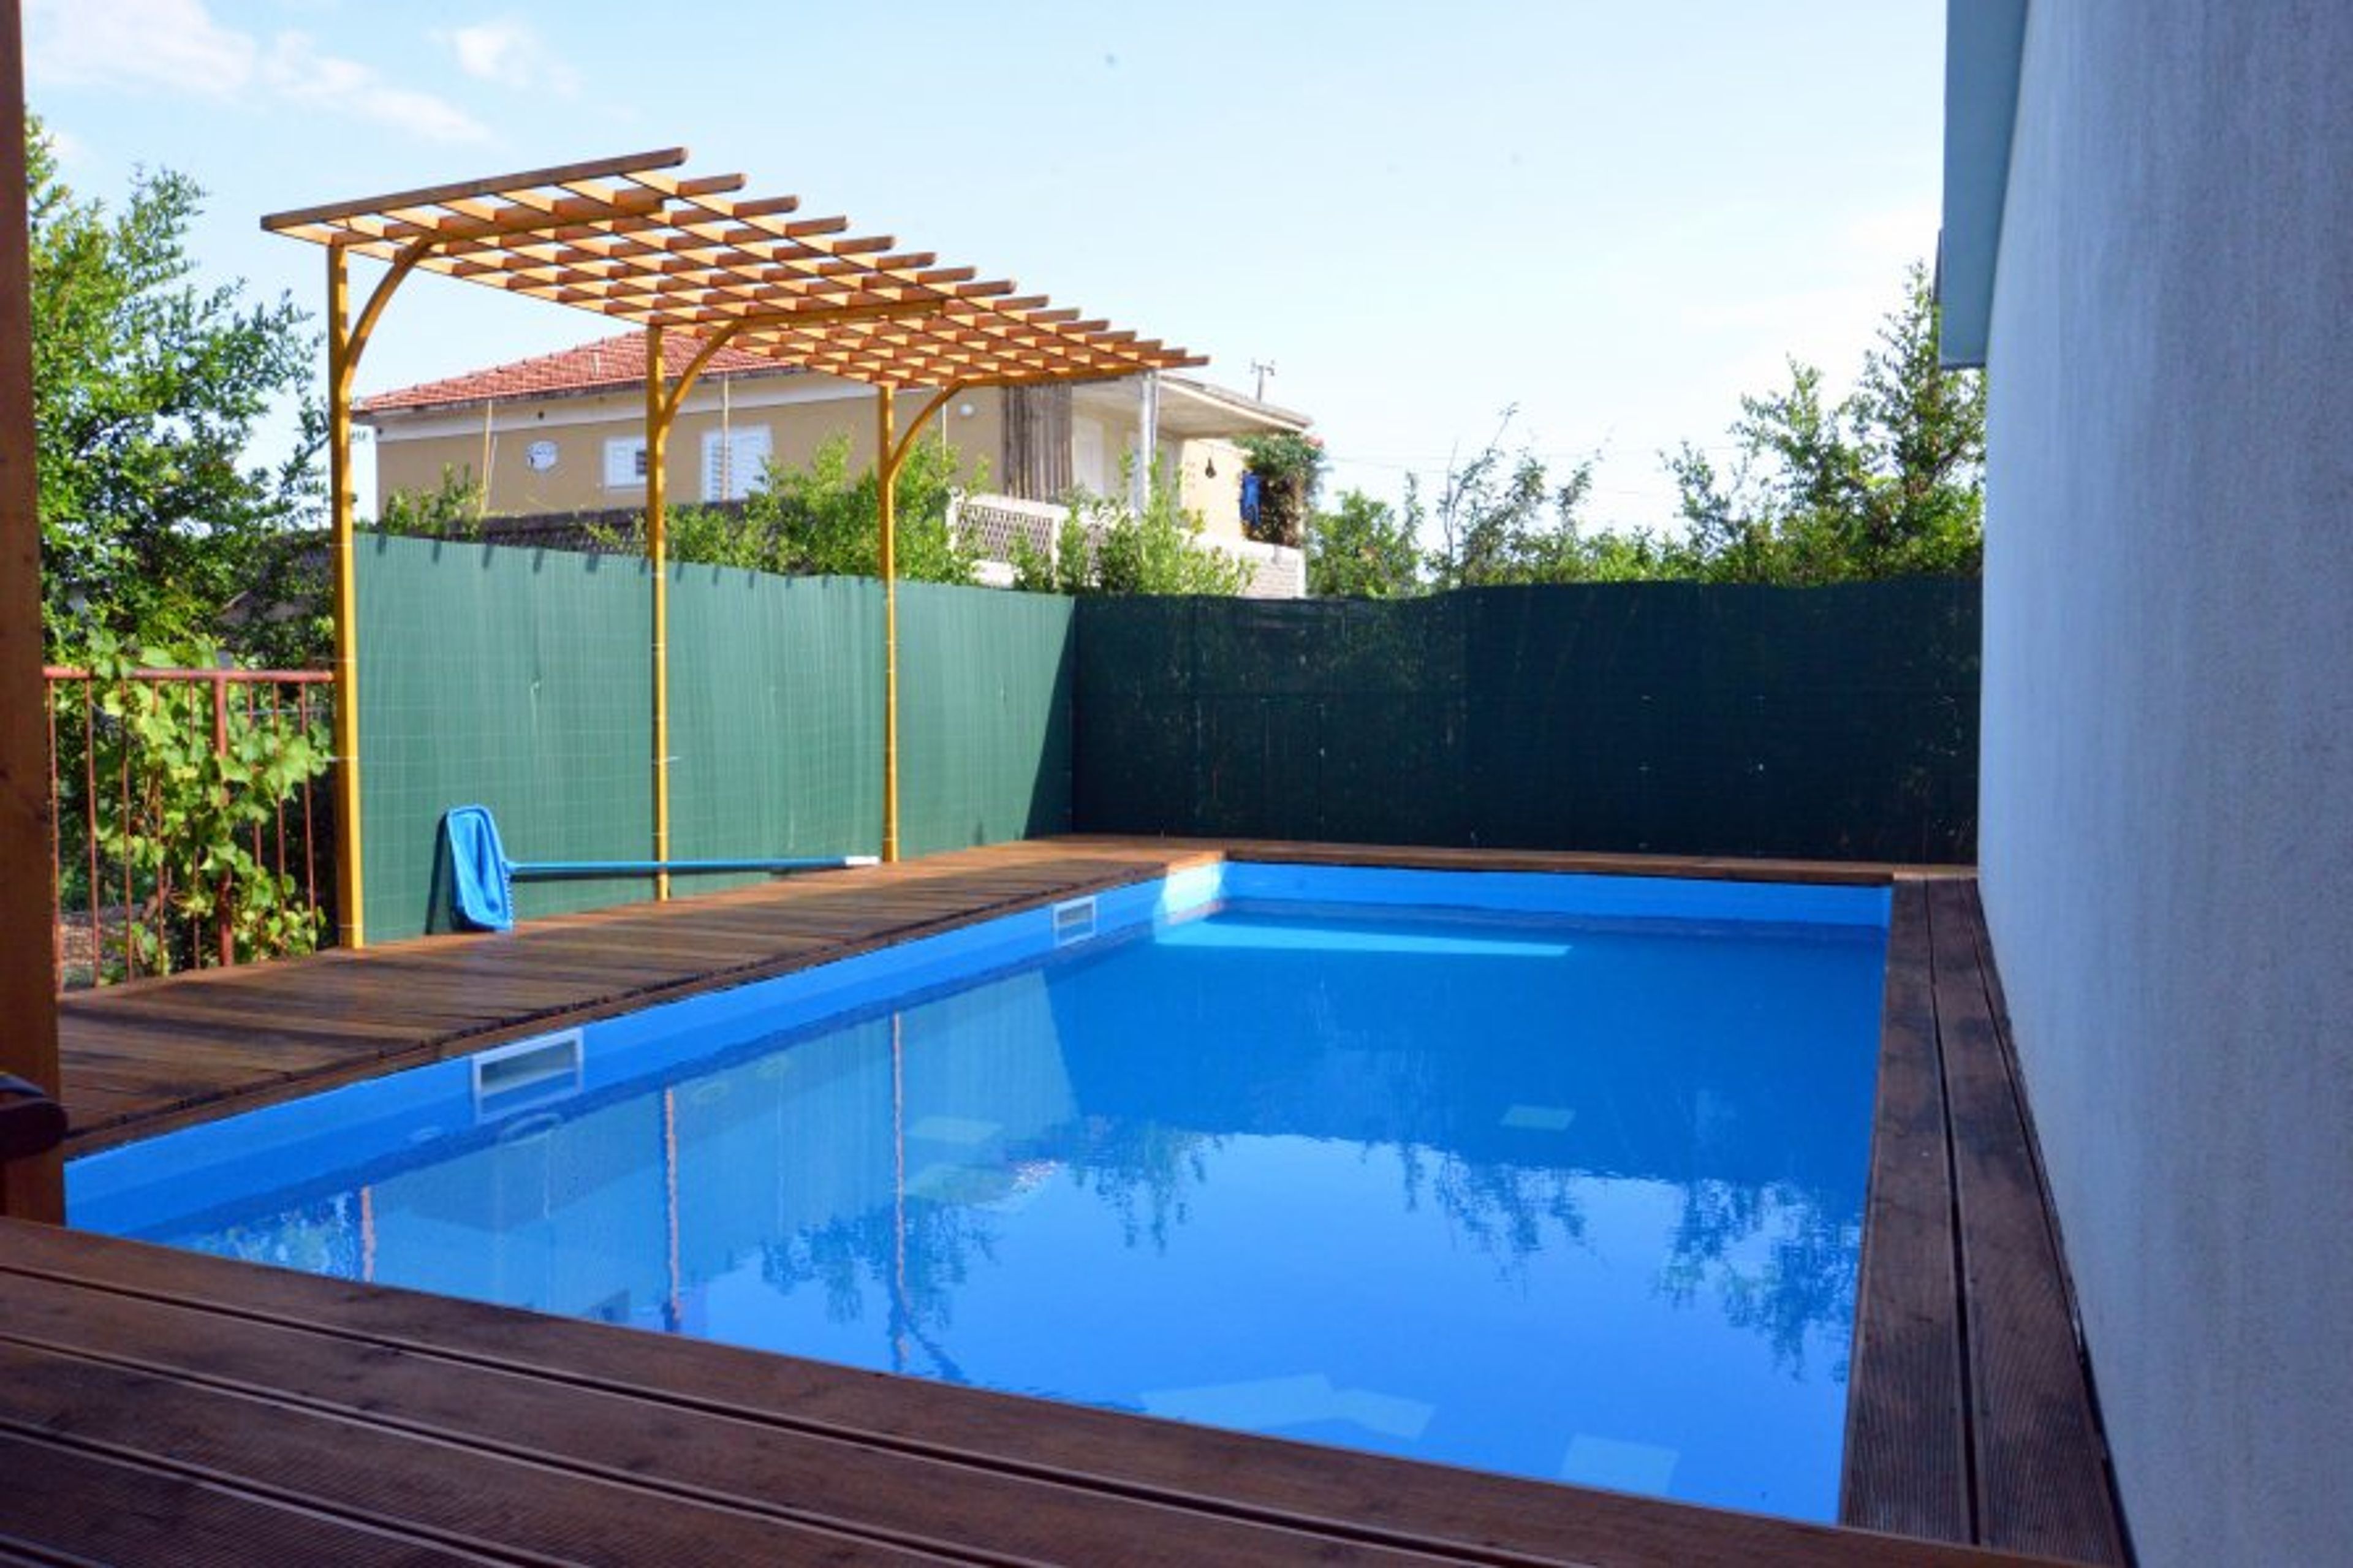 Private outdoor swimming pool